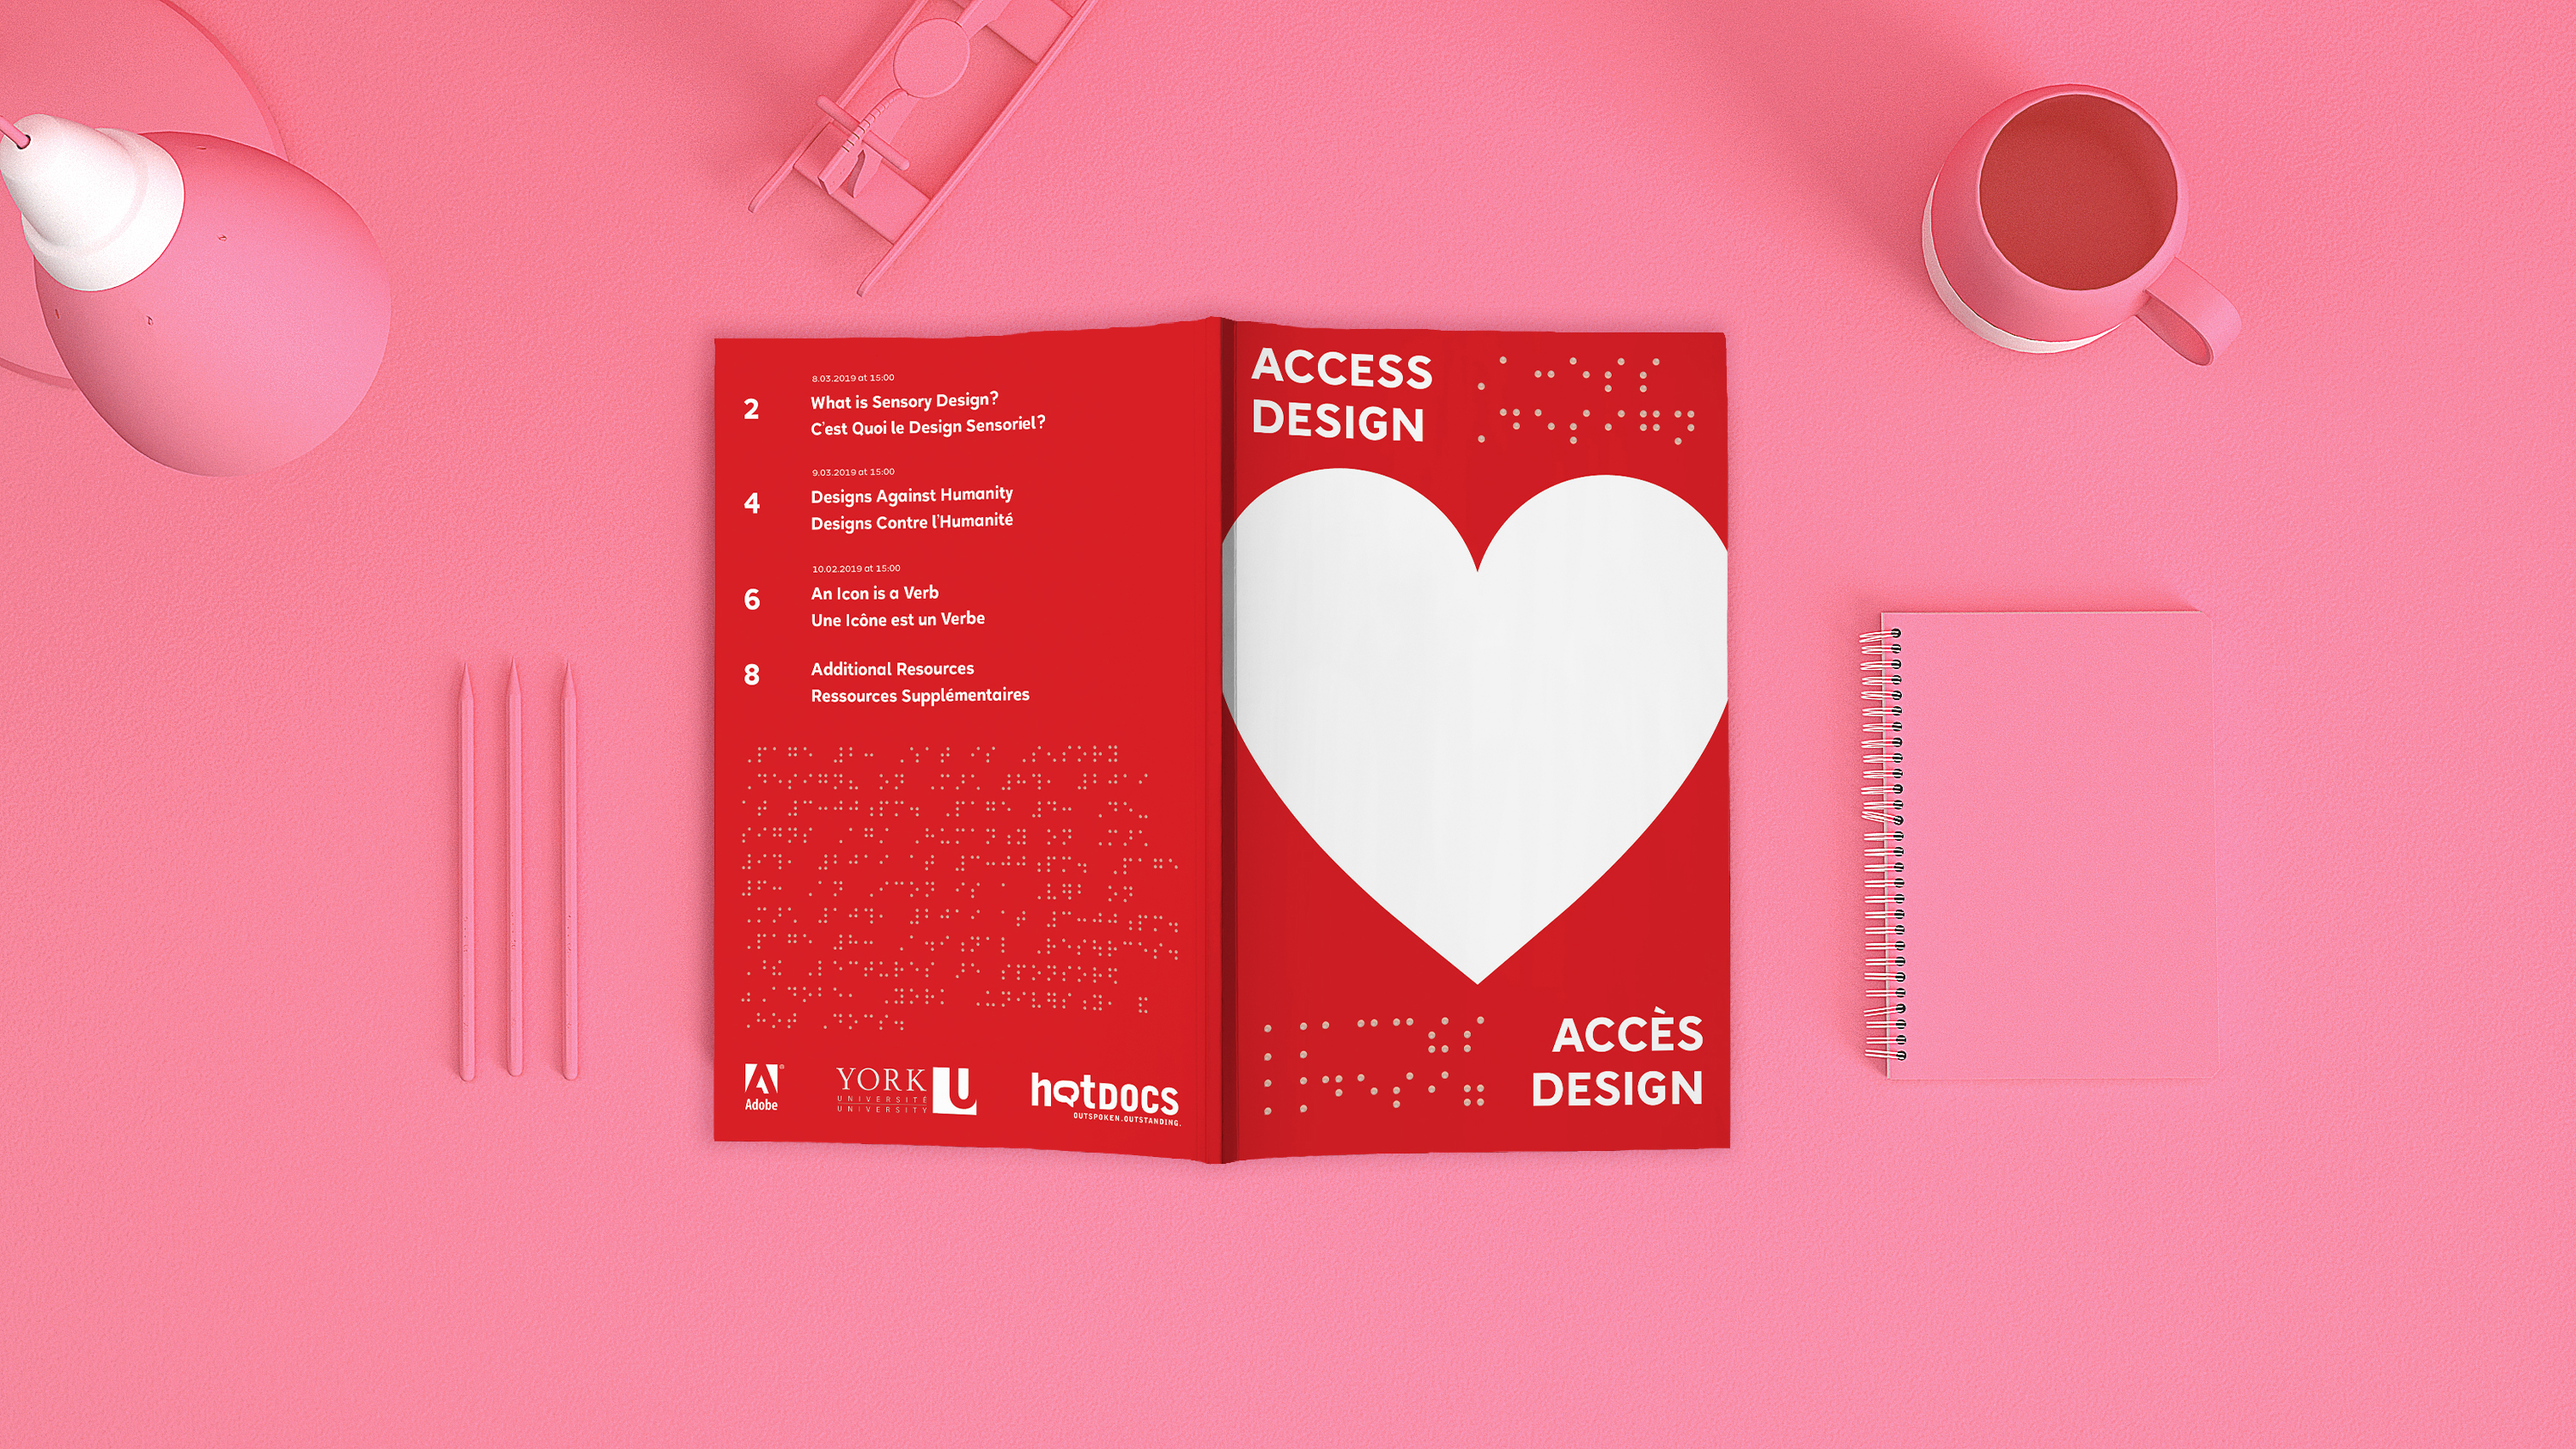 The front and back cover of the book portion of the Access Design Project. It features a condensed festival schedule, the festival name in English, French, and Braille, and a large heart symbol.